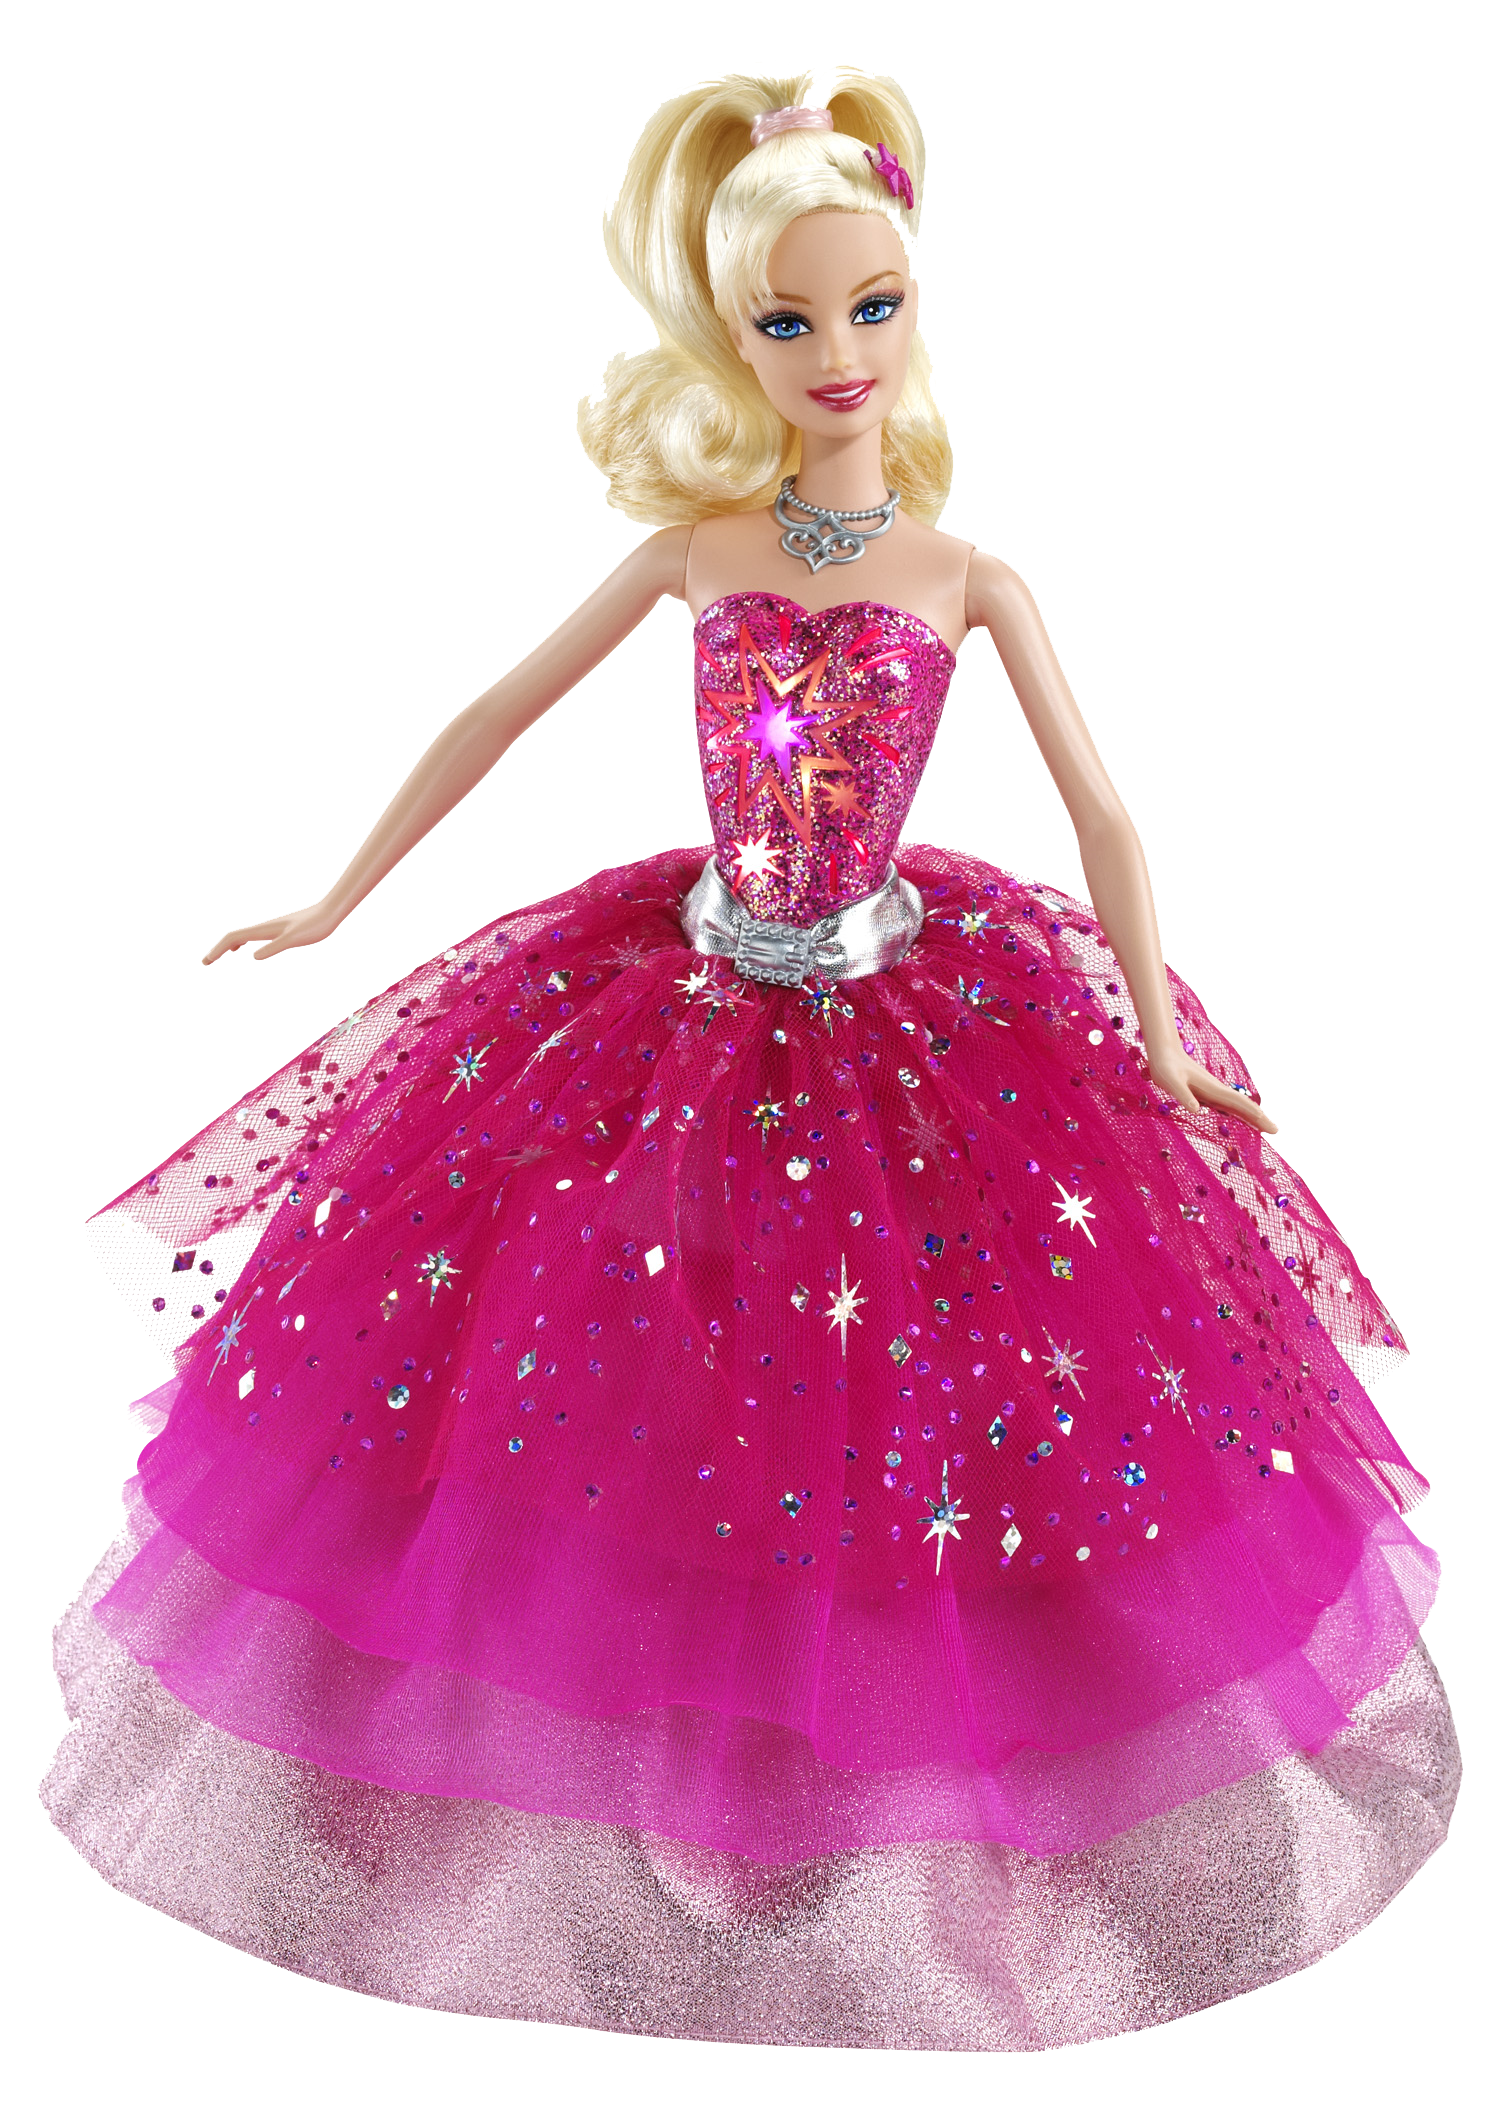 Barbie Doll Free Png Image - Barbie, Transparent background PNG HD thumbnail